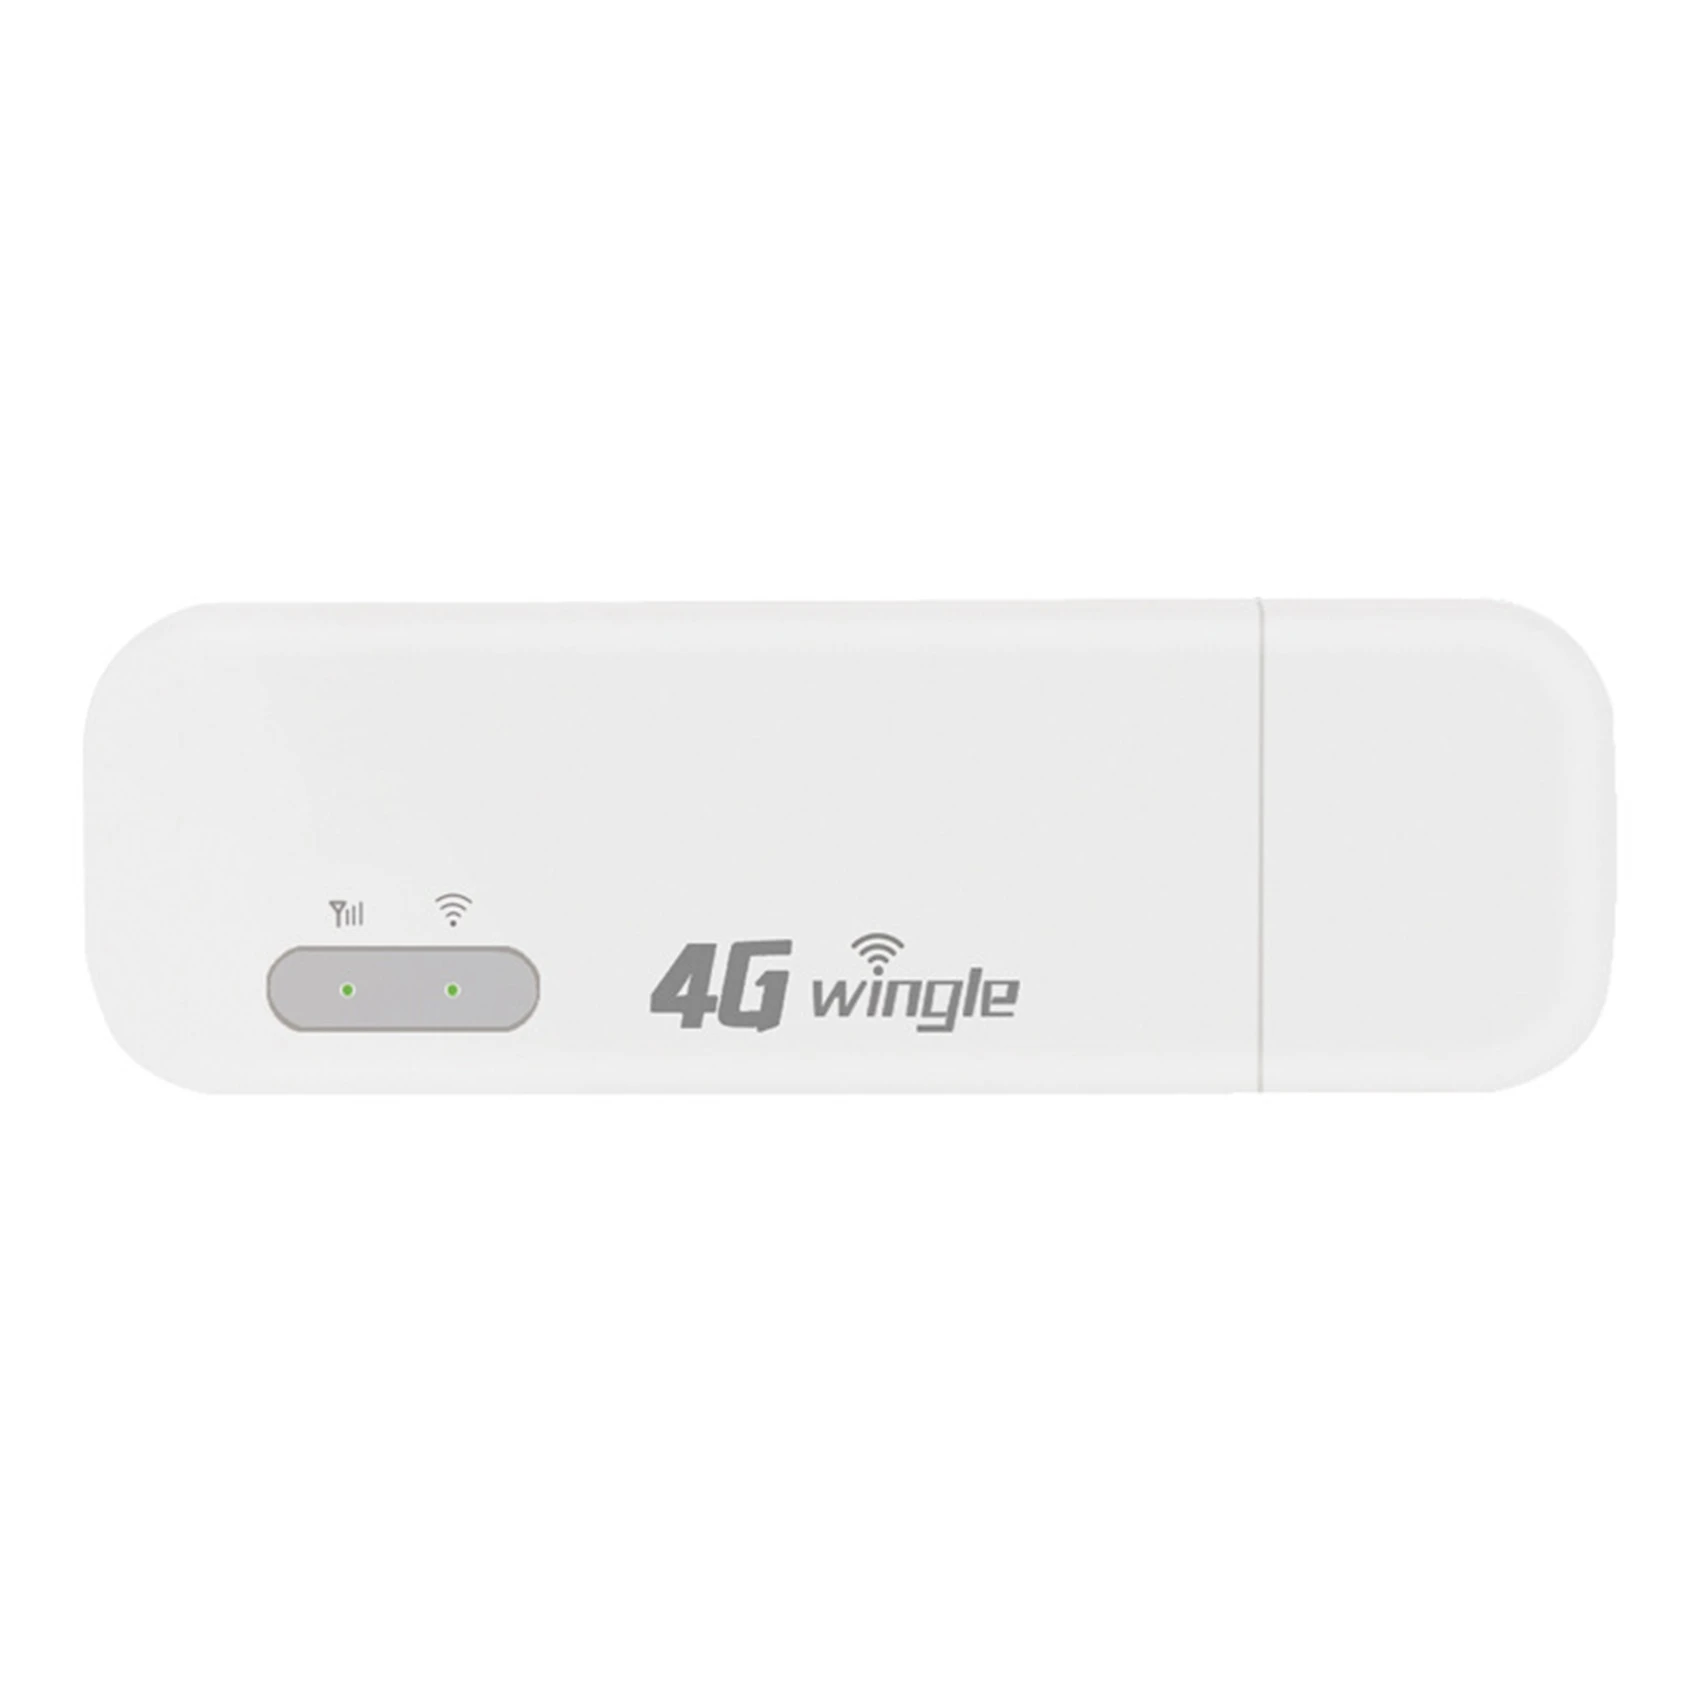 

4G WiFi Router USB Modem Mobile WiFi 150M USB WiFi Dongle for Wireless Hotspot with SIM Card Slot (White)